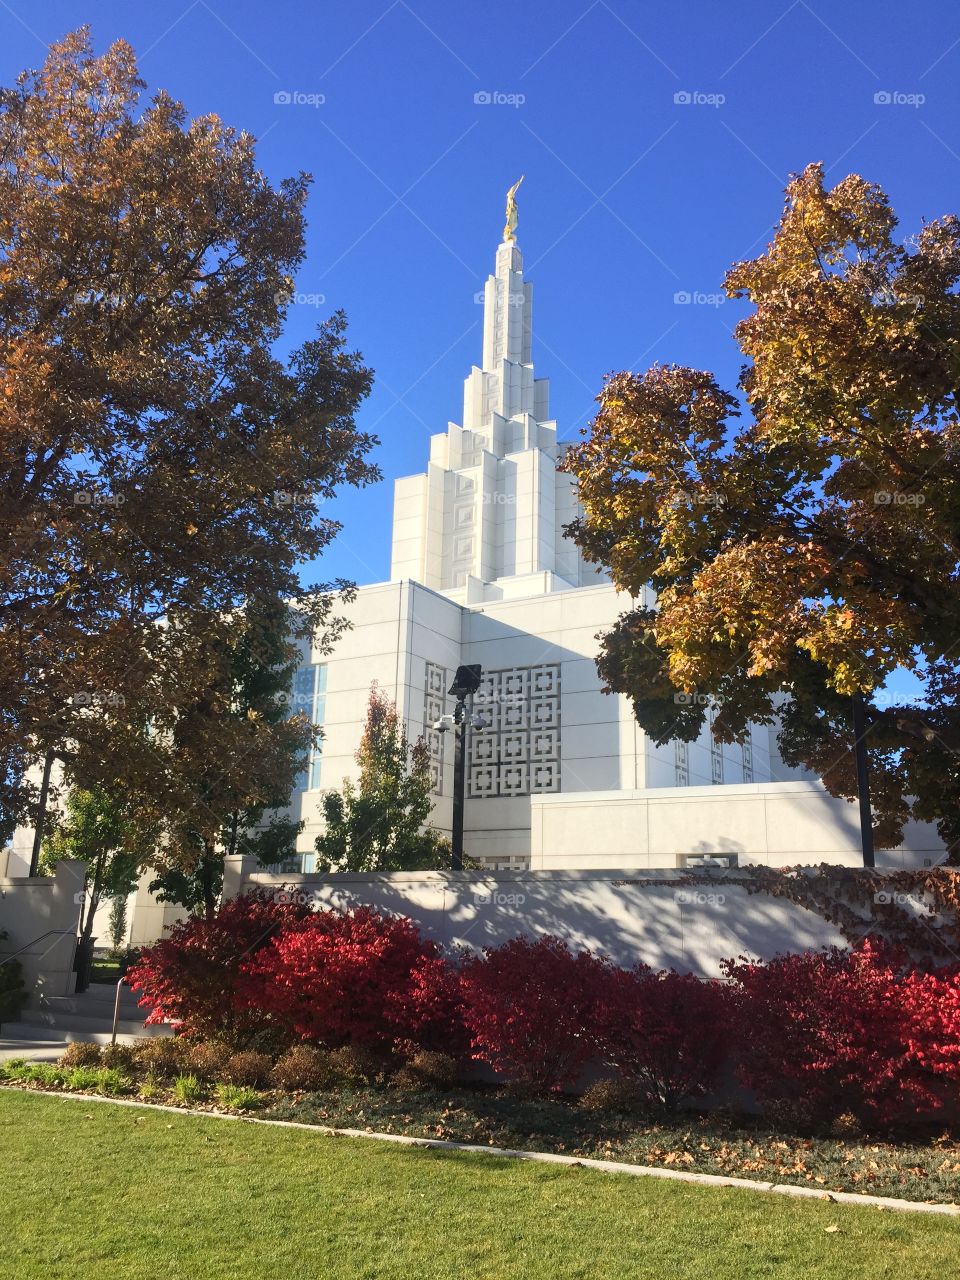 Idaho Falls LDS Temple surrounded by vibrant autumn colors on a clear day